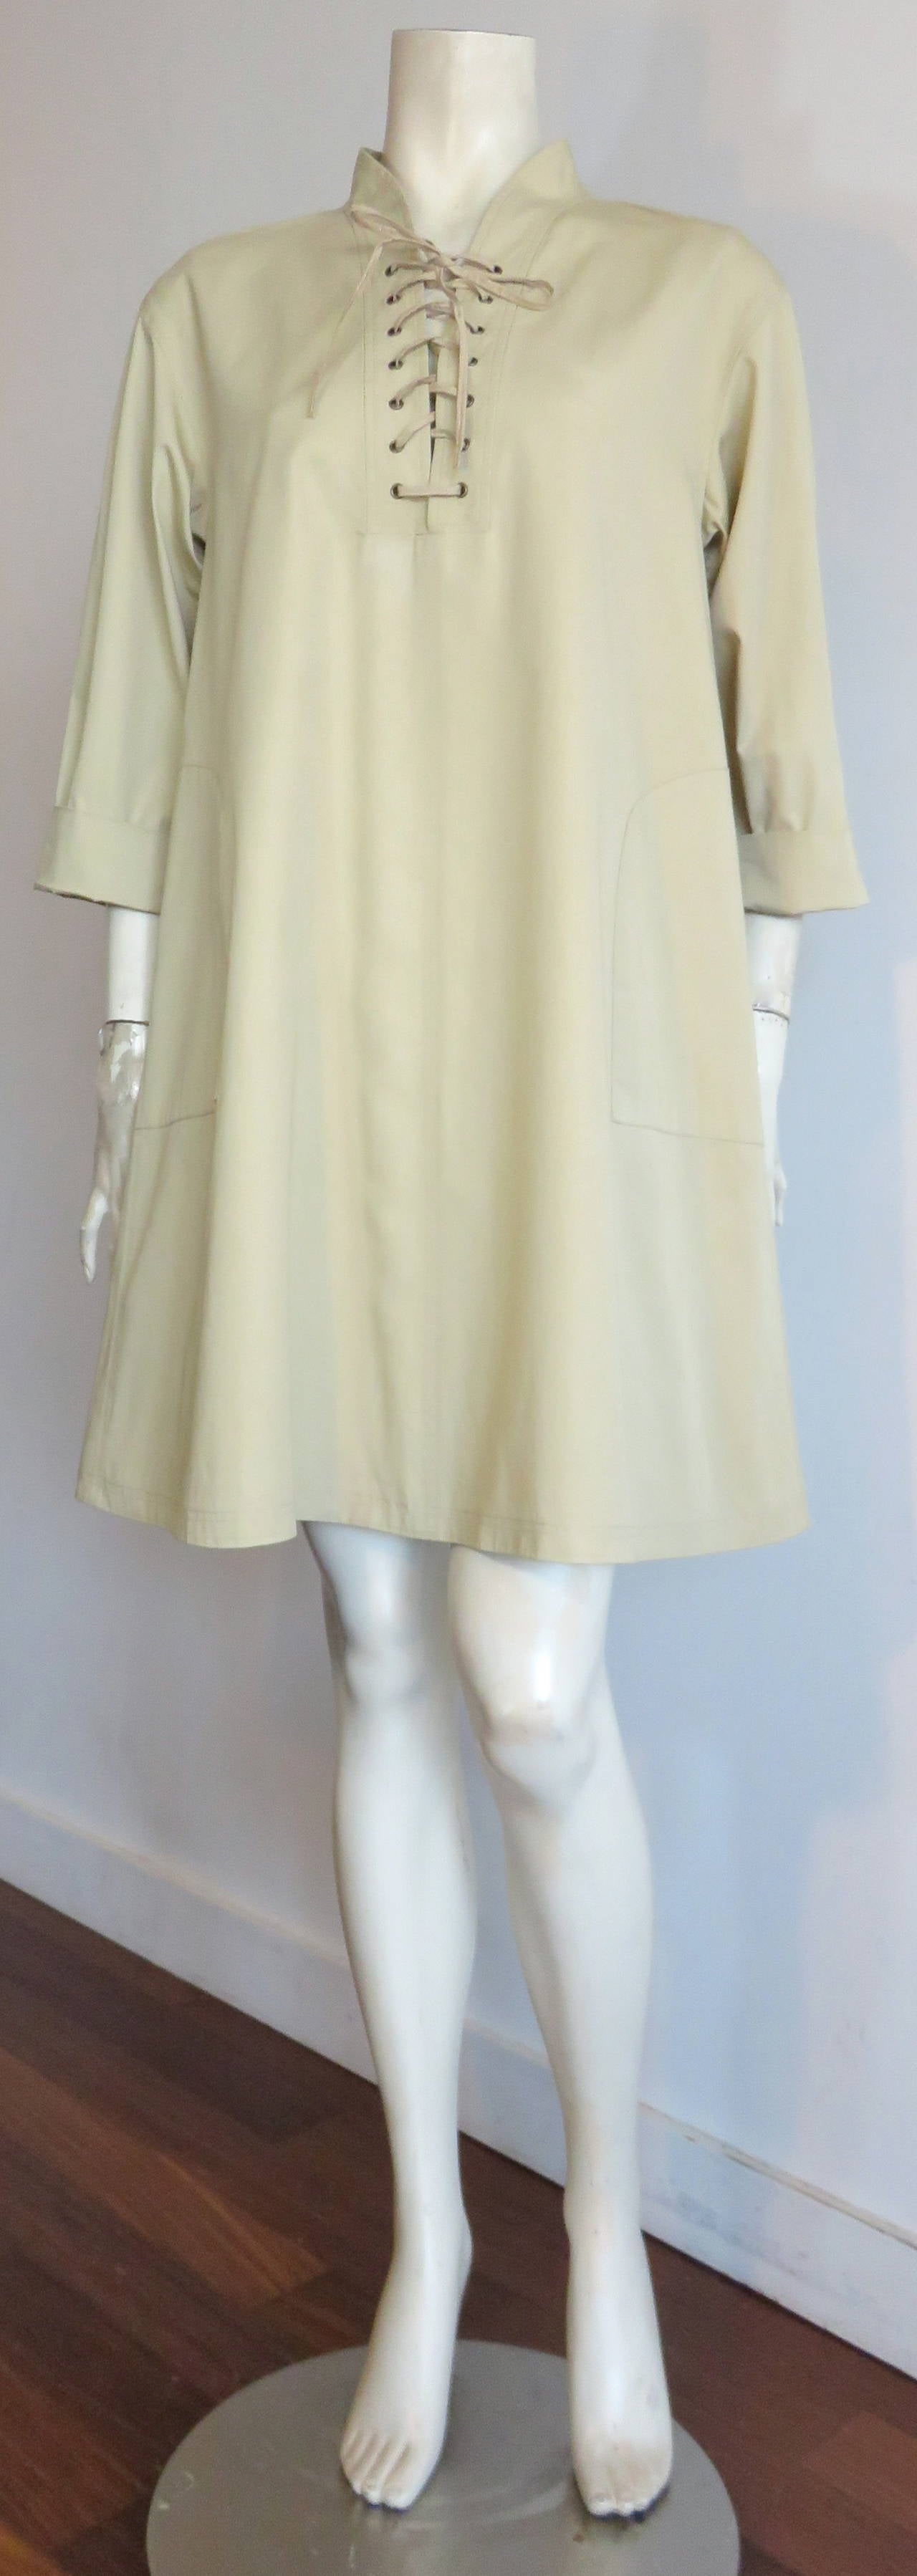 Great condition, 1990's YVES SAINT LAURENT Safari tunic dress.

Loose-fit, 'A-line' silhouette, tunic dress with iconic, YSL lace-up front construction.

Cuffed, 3/4-length sleeves.

Made in France, as labeled.

*MEASUREMENTS*

FR Label